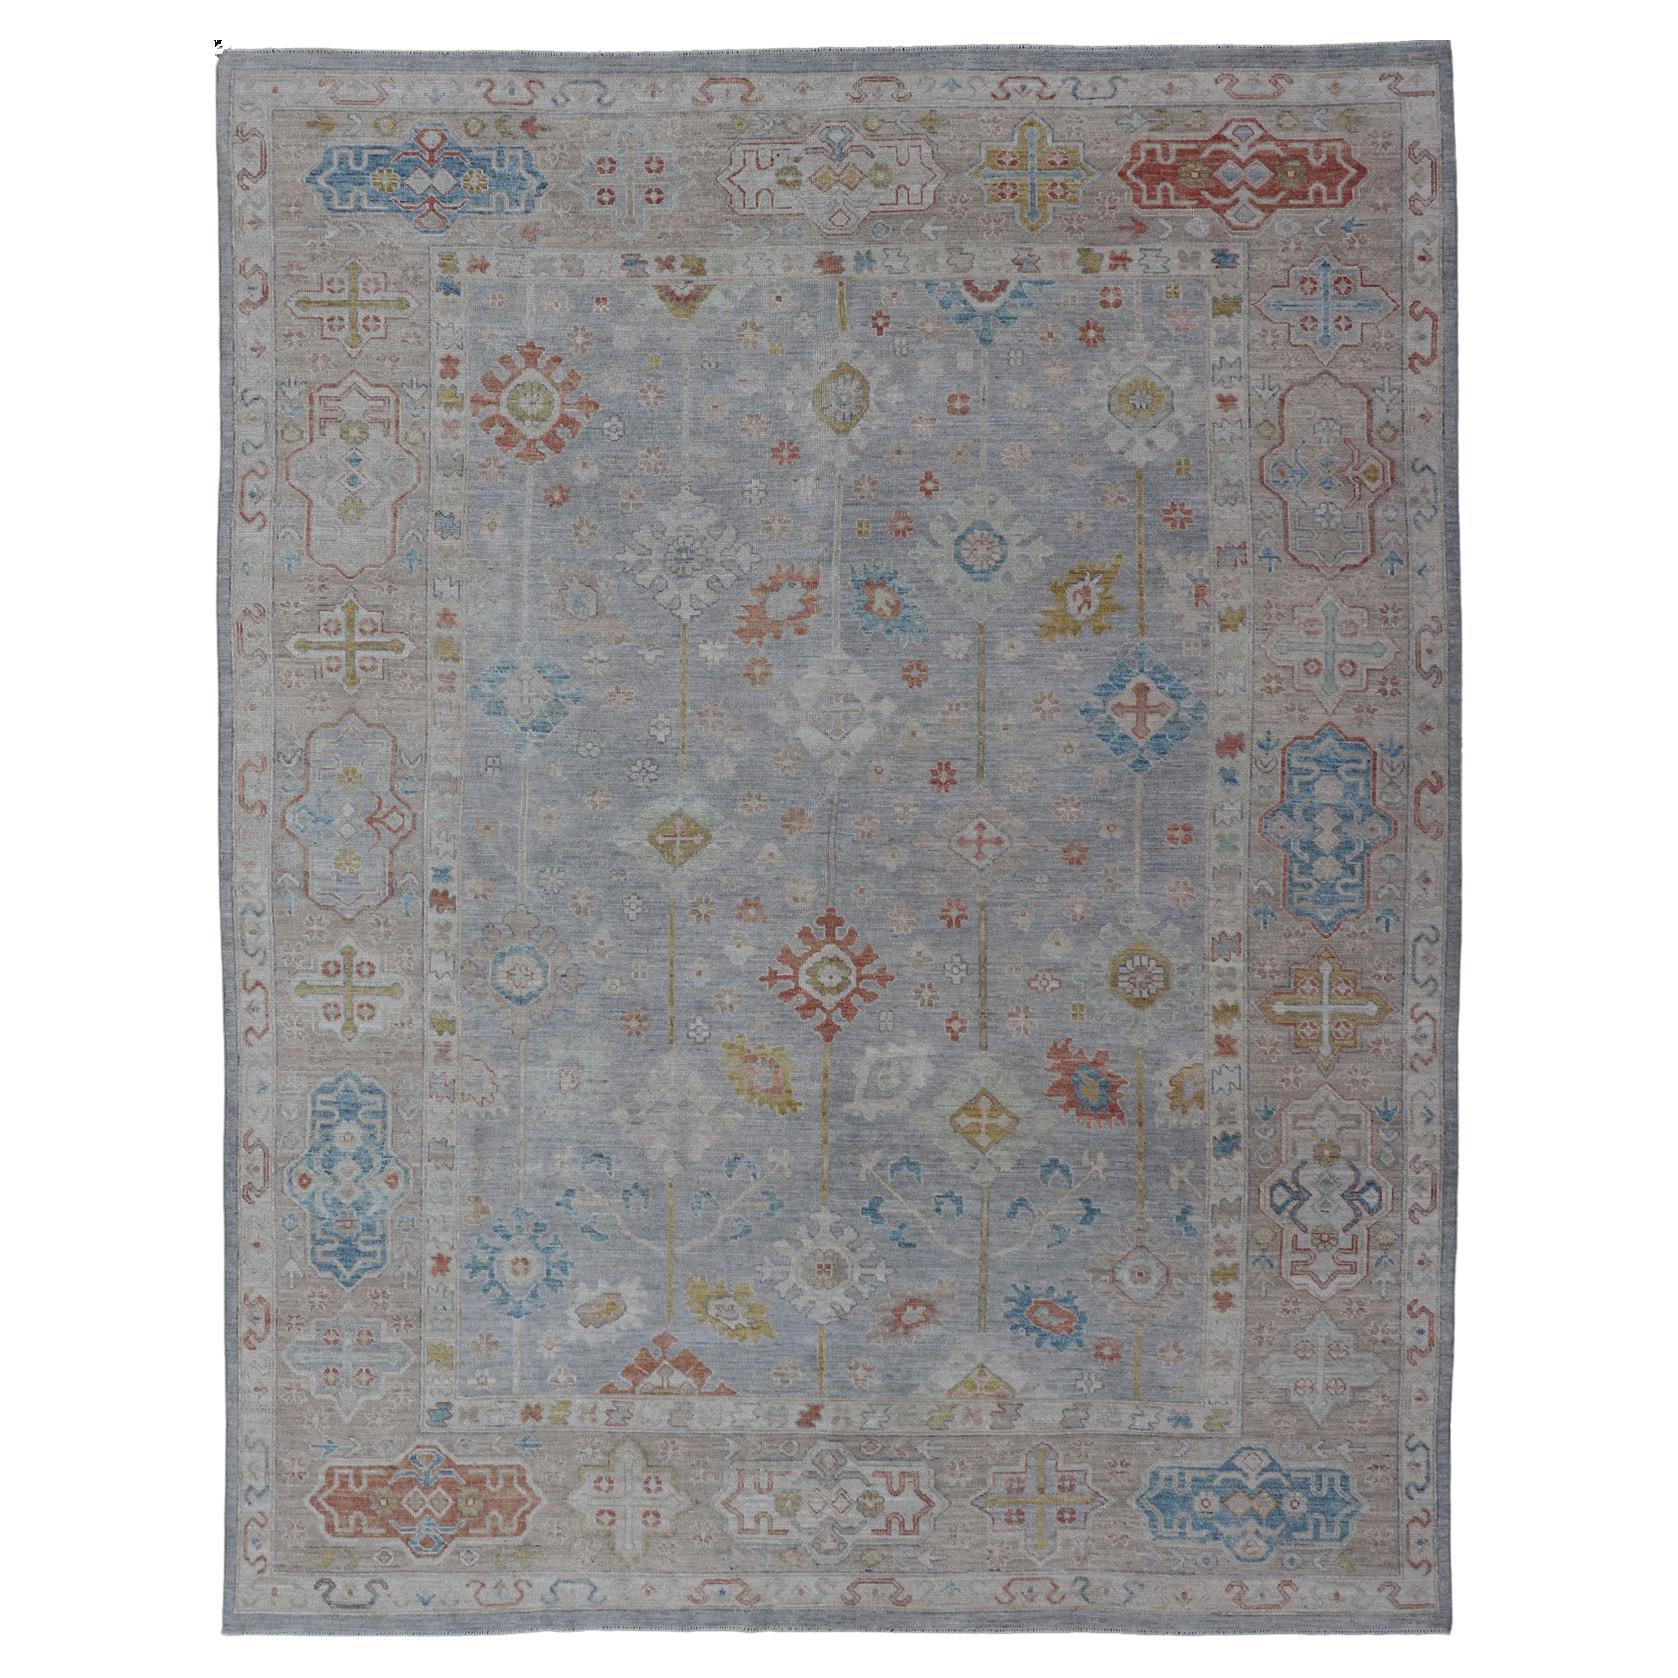 Modern Oushak Rug Hand Knotted on a Light Gray Field and Rusty Orange